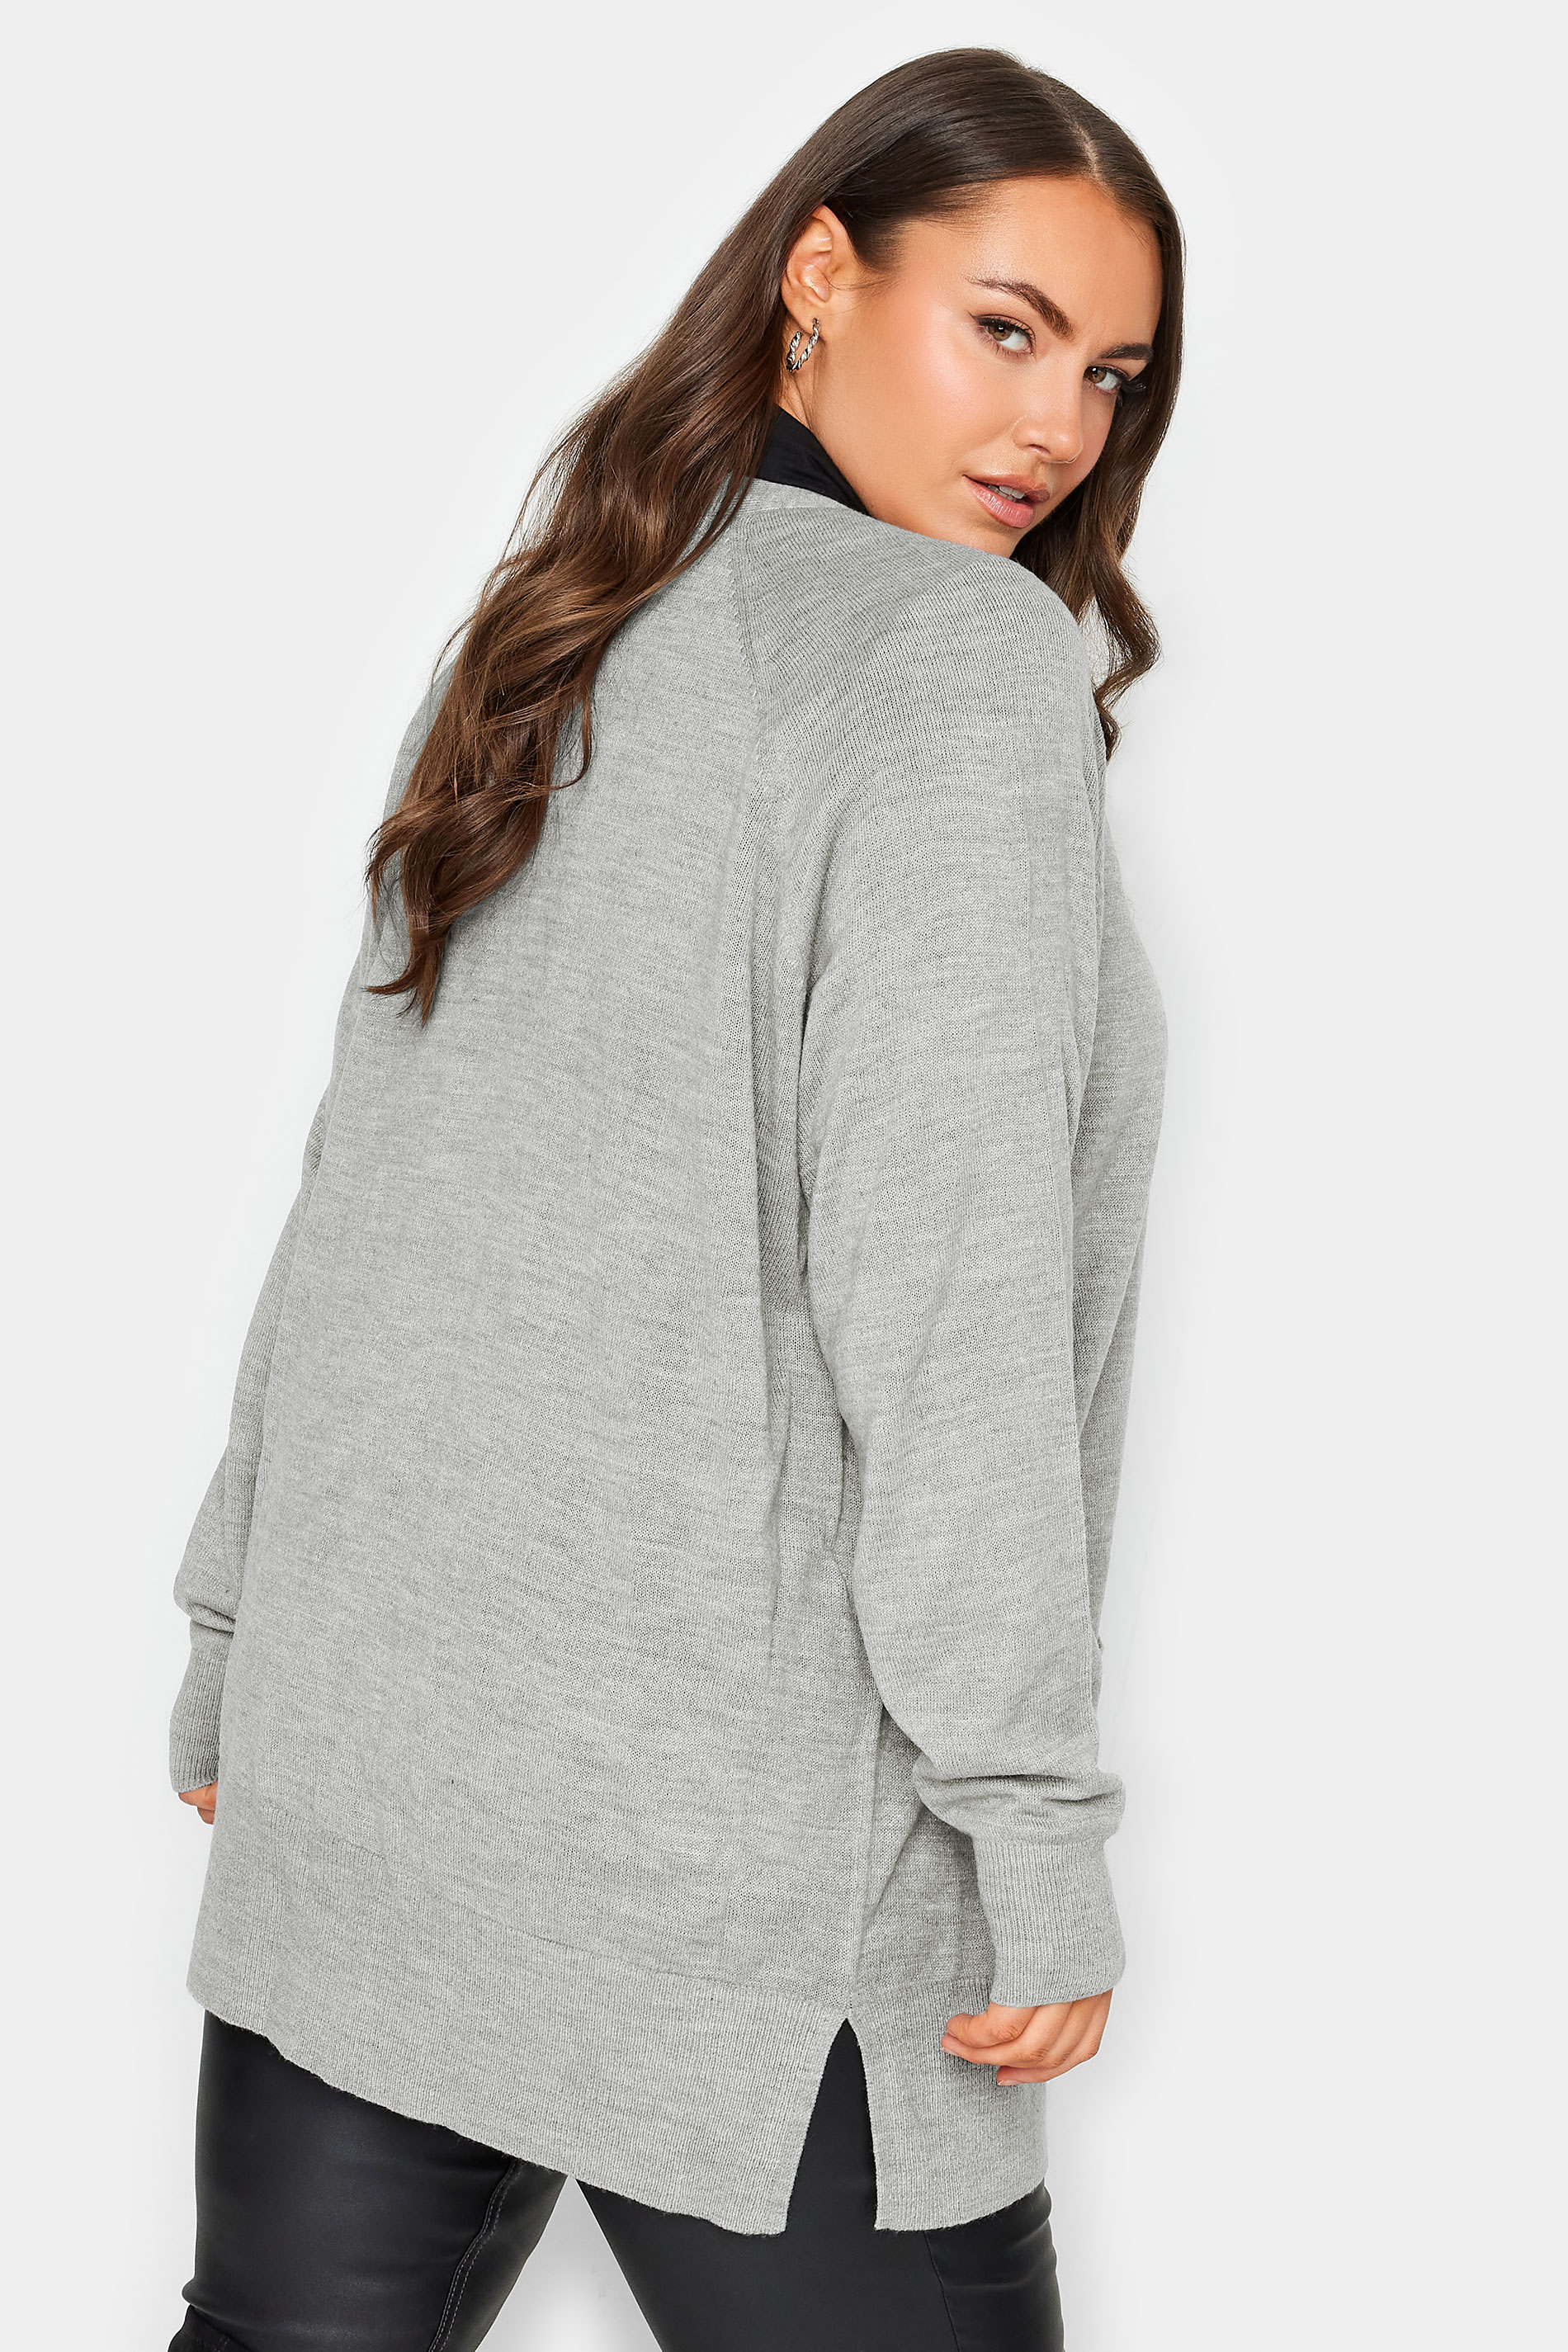 YOURS Plus Size Grey Boyfriend Button Through Cardigan | Yours Clothing 3